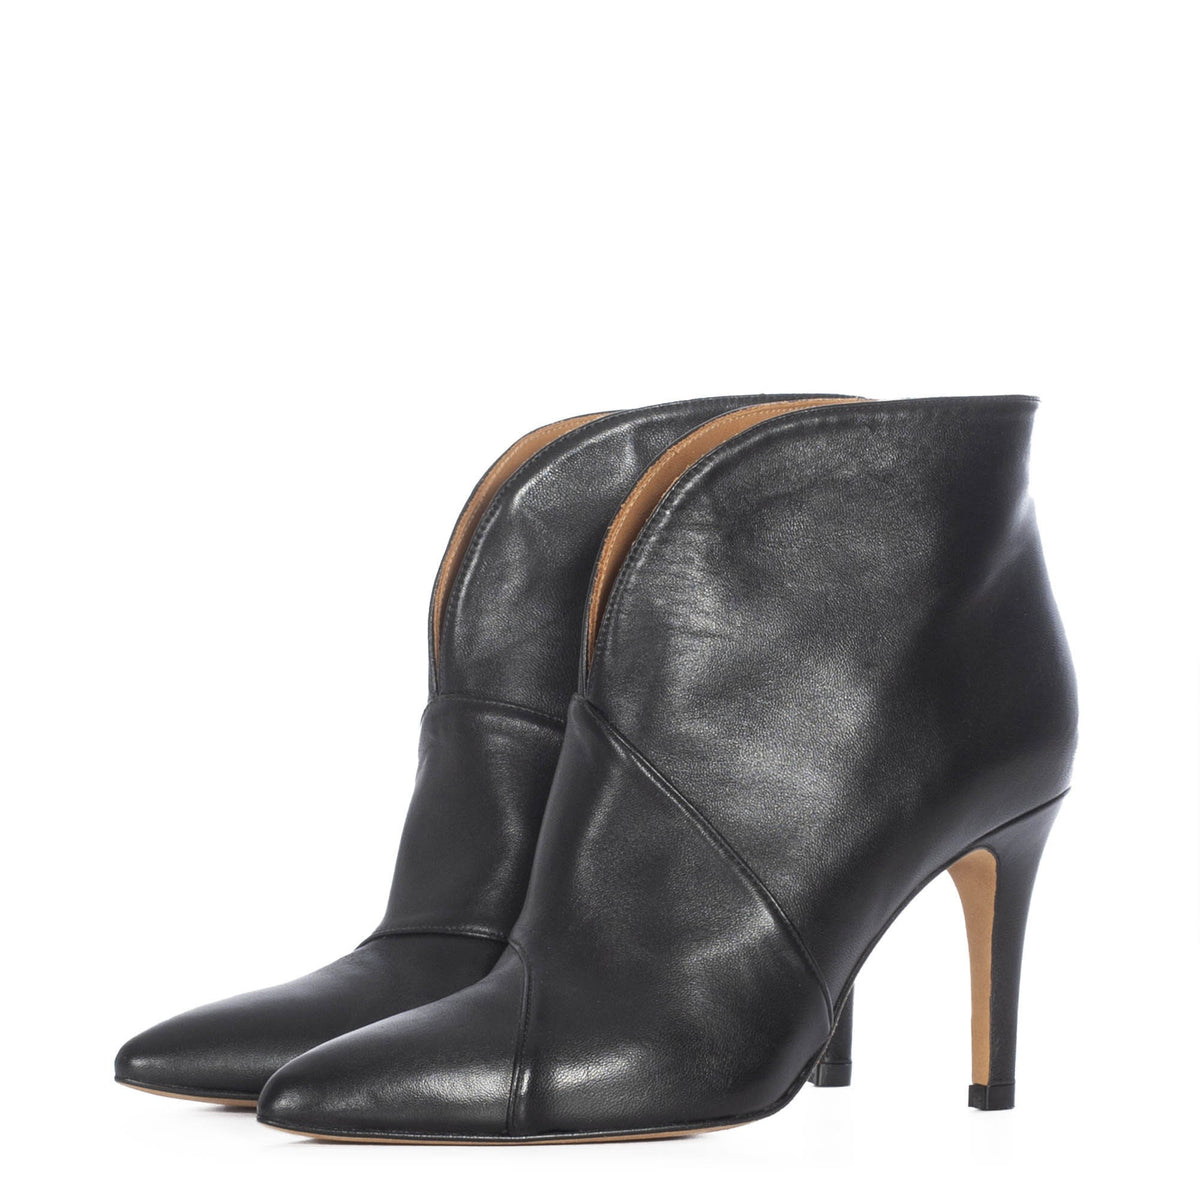 TORAL BLACK LEATHER ANKLE BOOTS – Toral